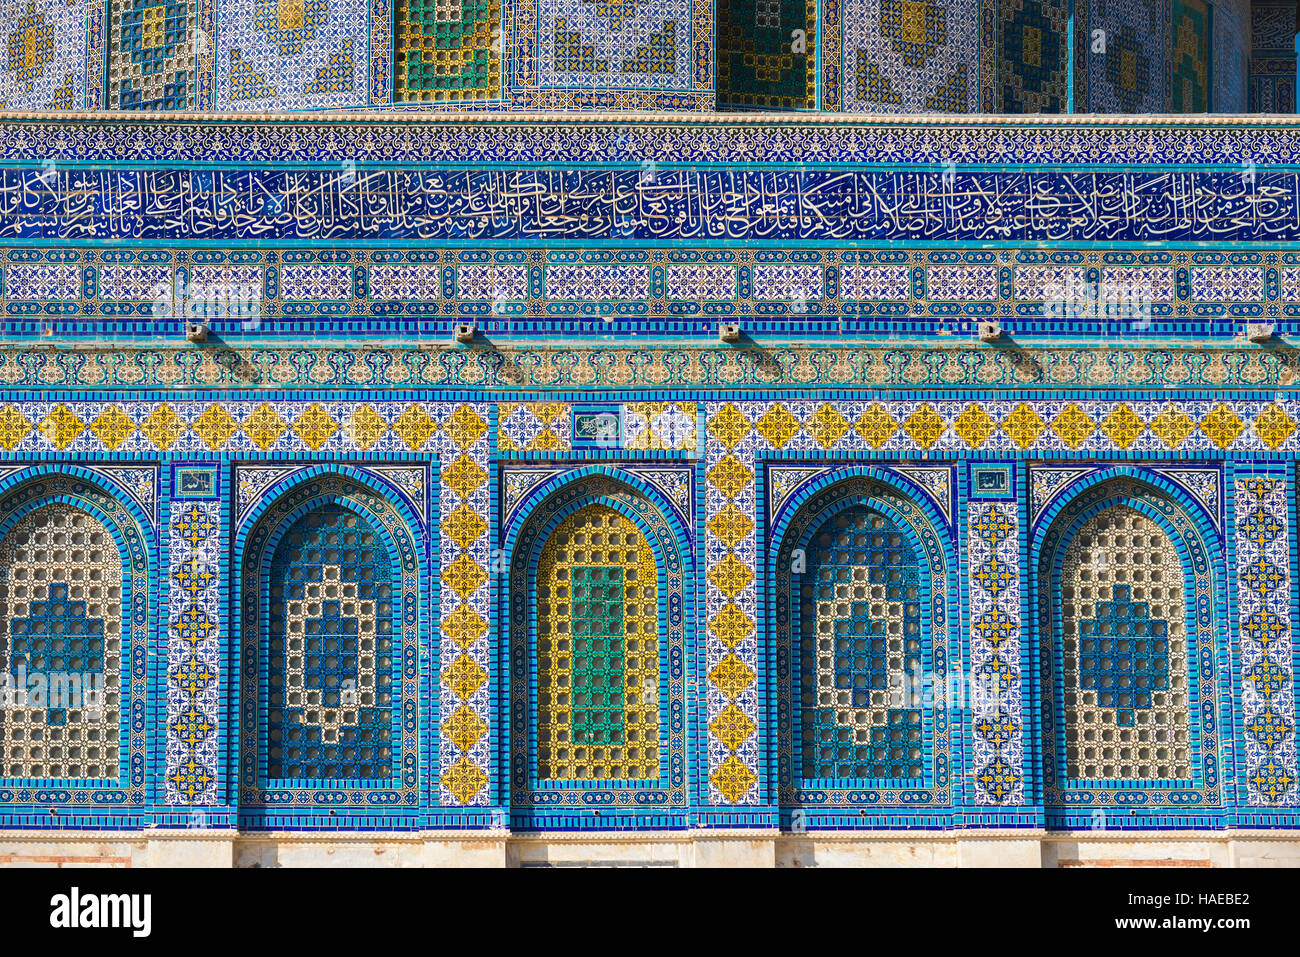 Detail of the Mosaic on the Dome of the Rock. Jerusalem, Israel Stock Photo